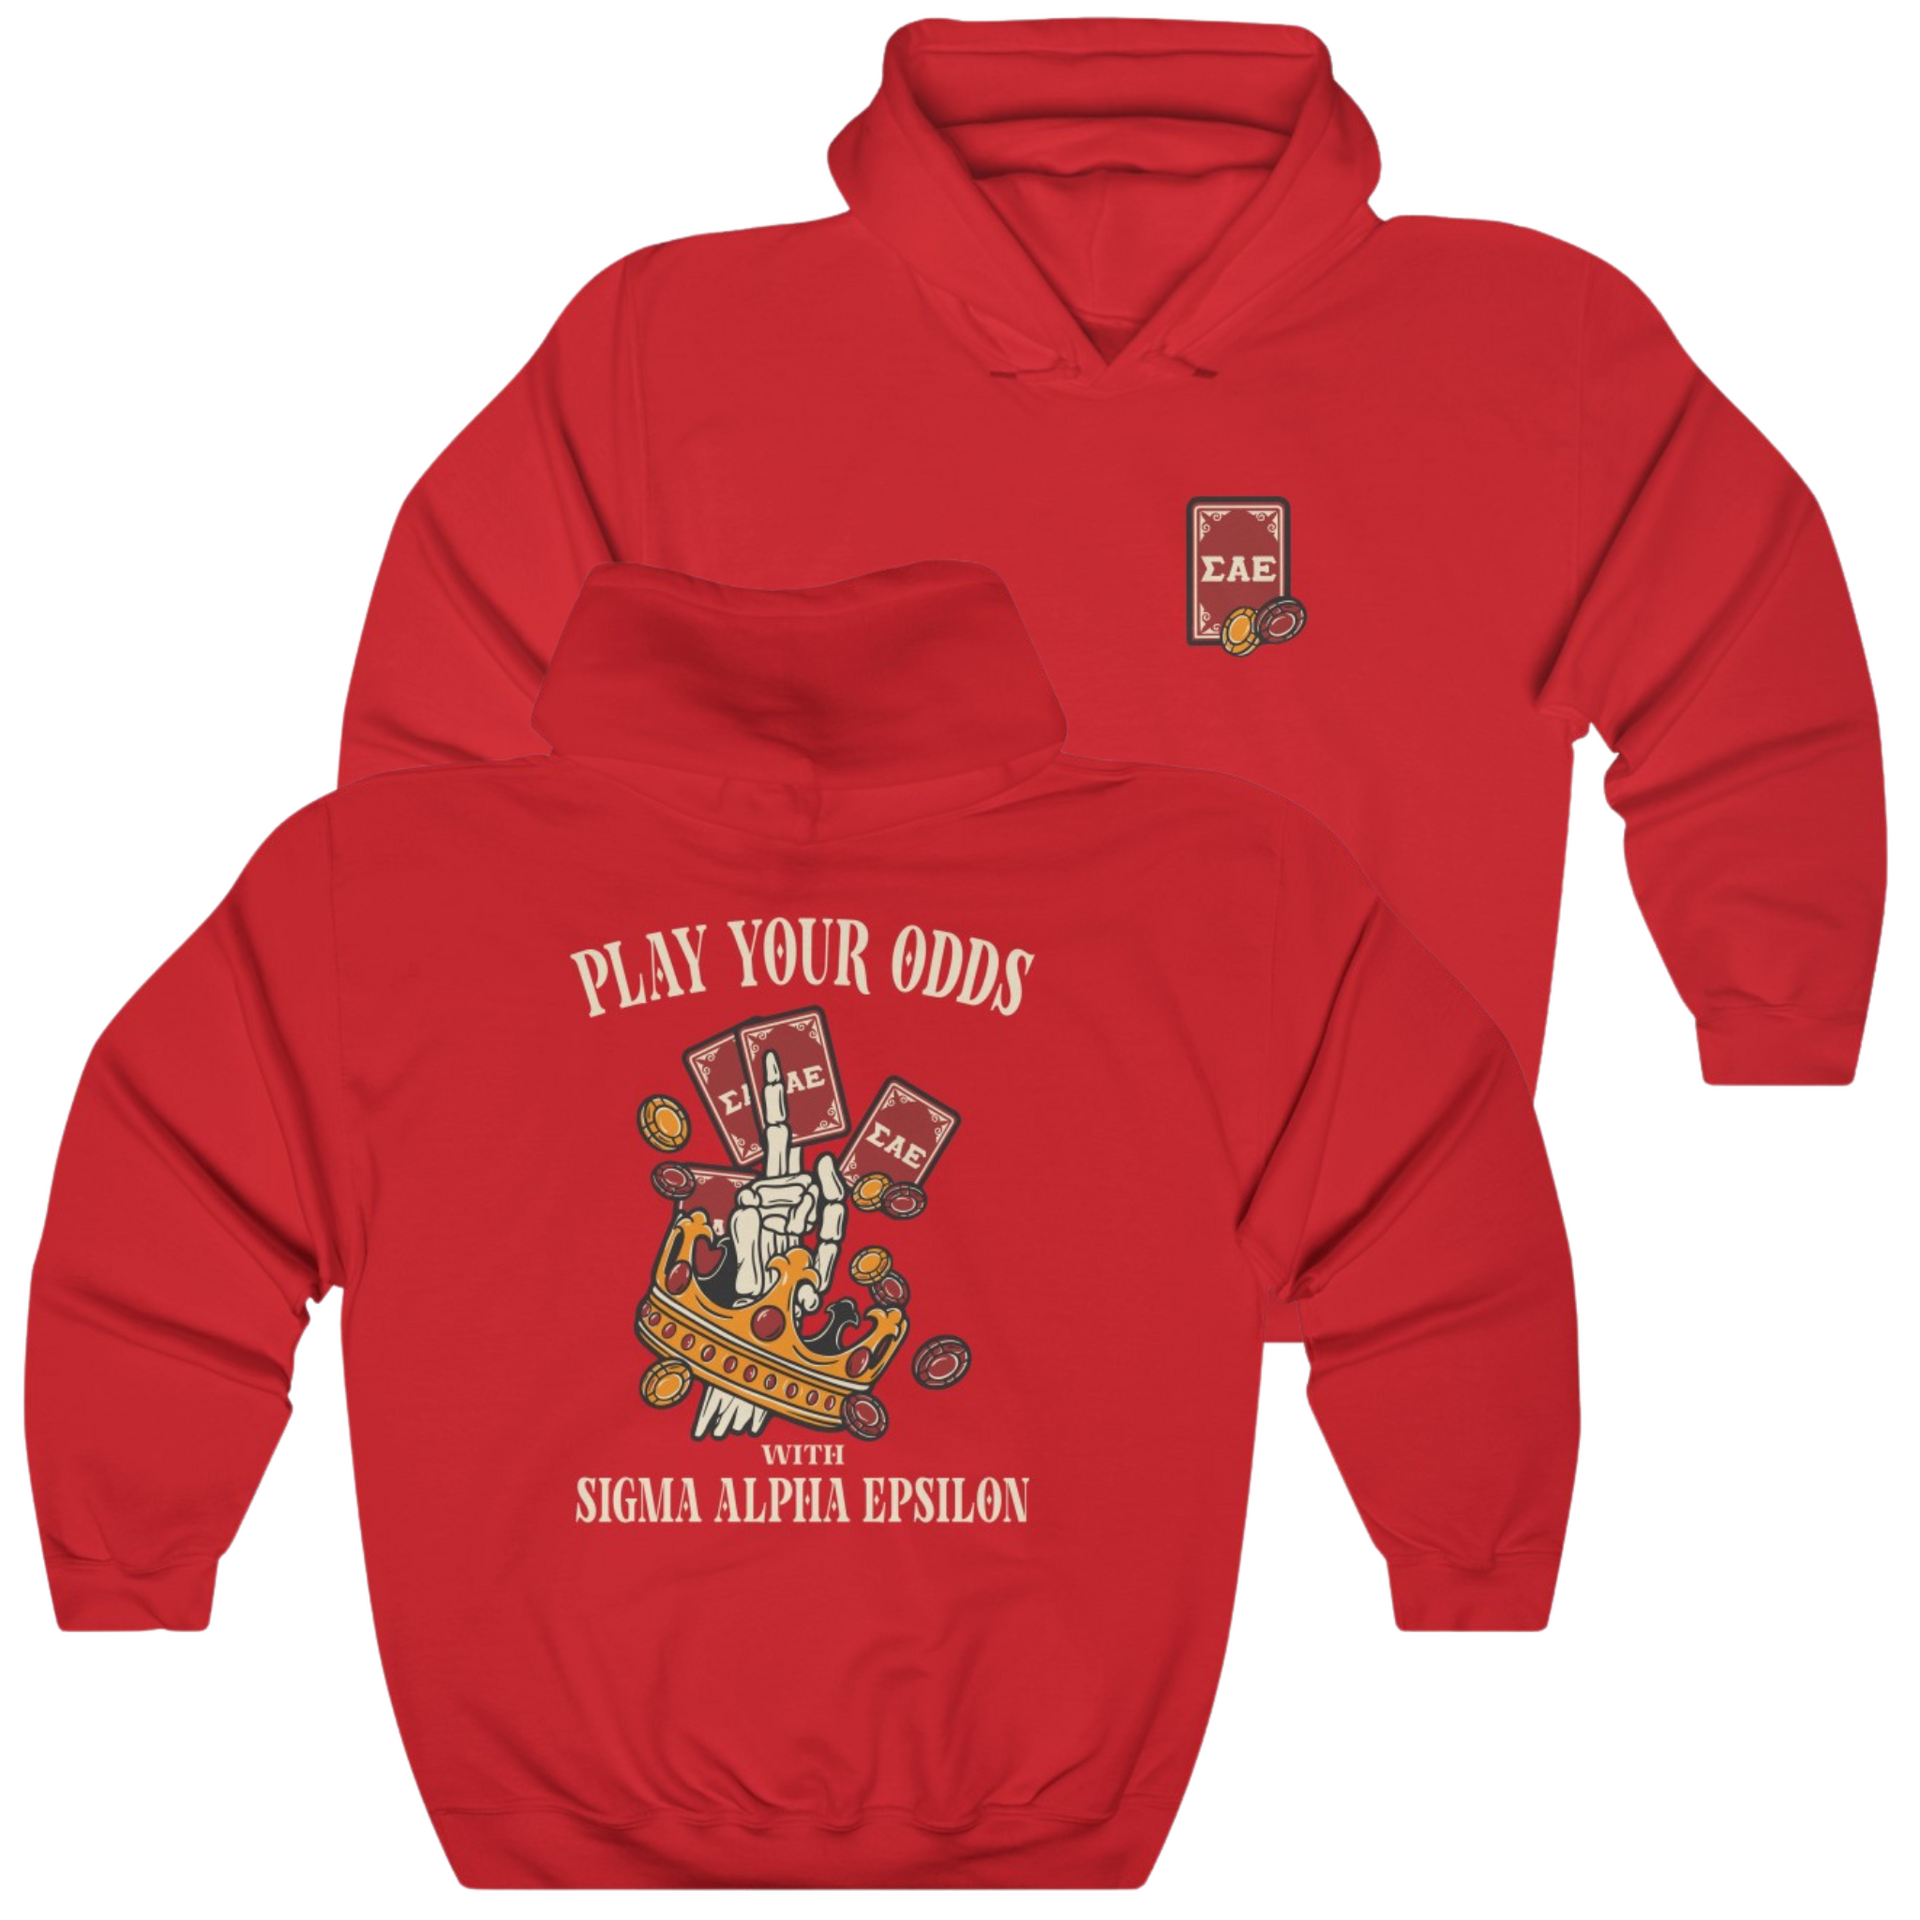 red Sigma Alpha Epsilon Graphic Hoodie | Play Your Odds | Sigma Alpha Epsilon Clothing and Merchandise